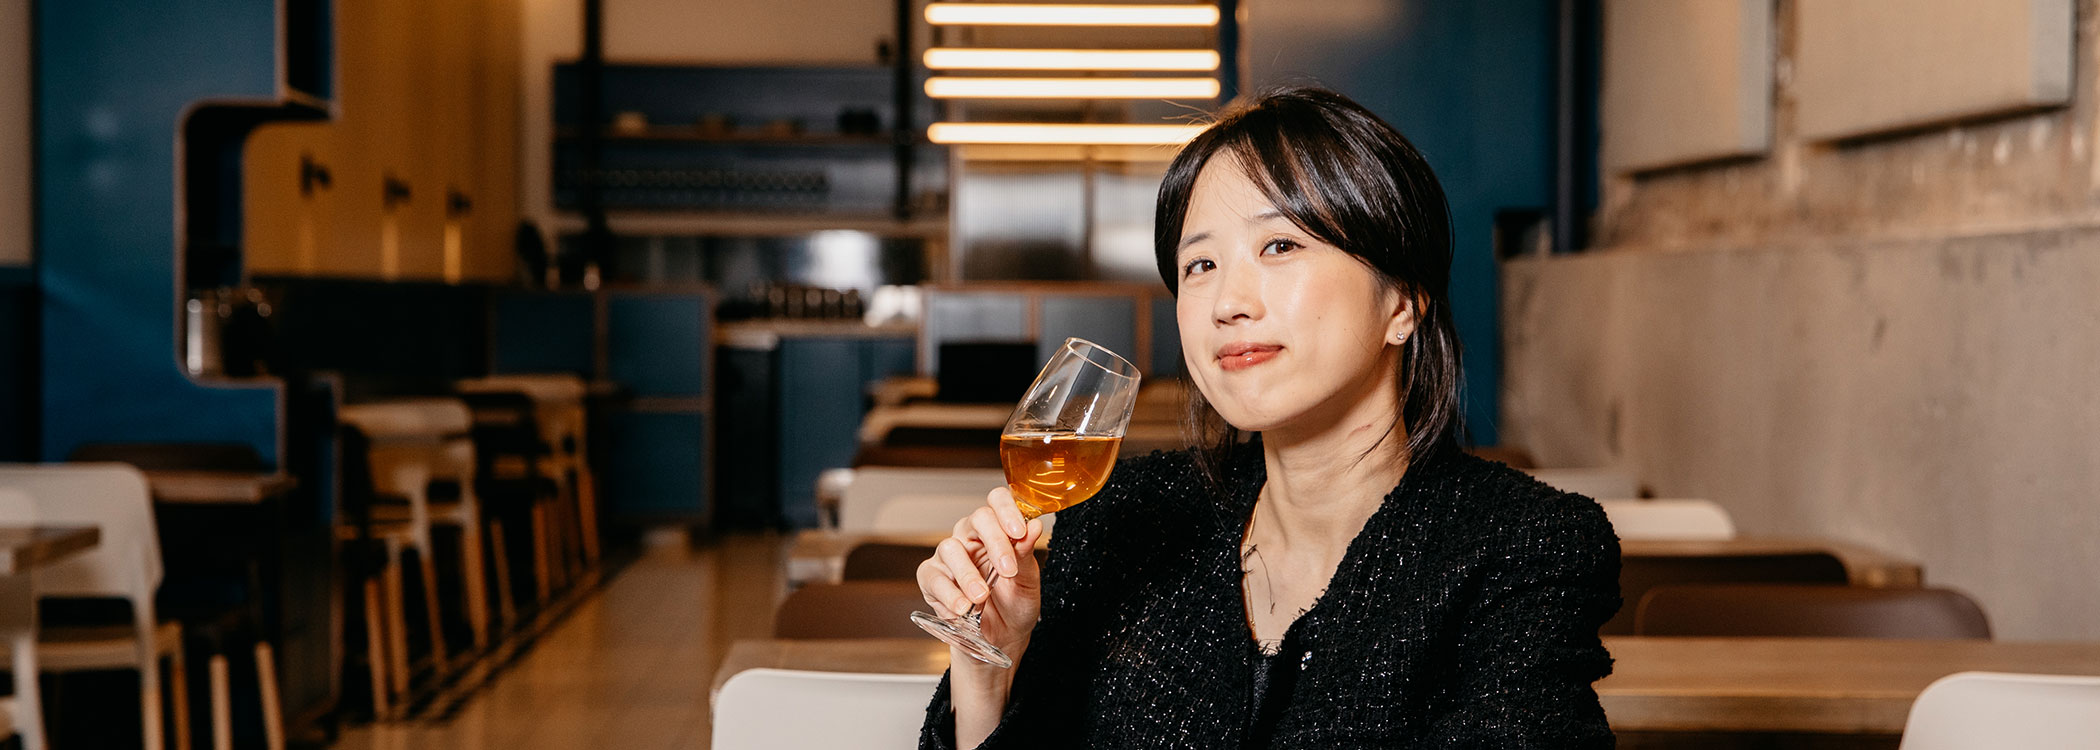 40 AAPI Women On The State Of The Hospitality Industry